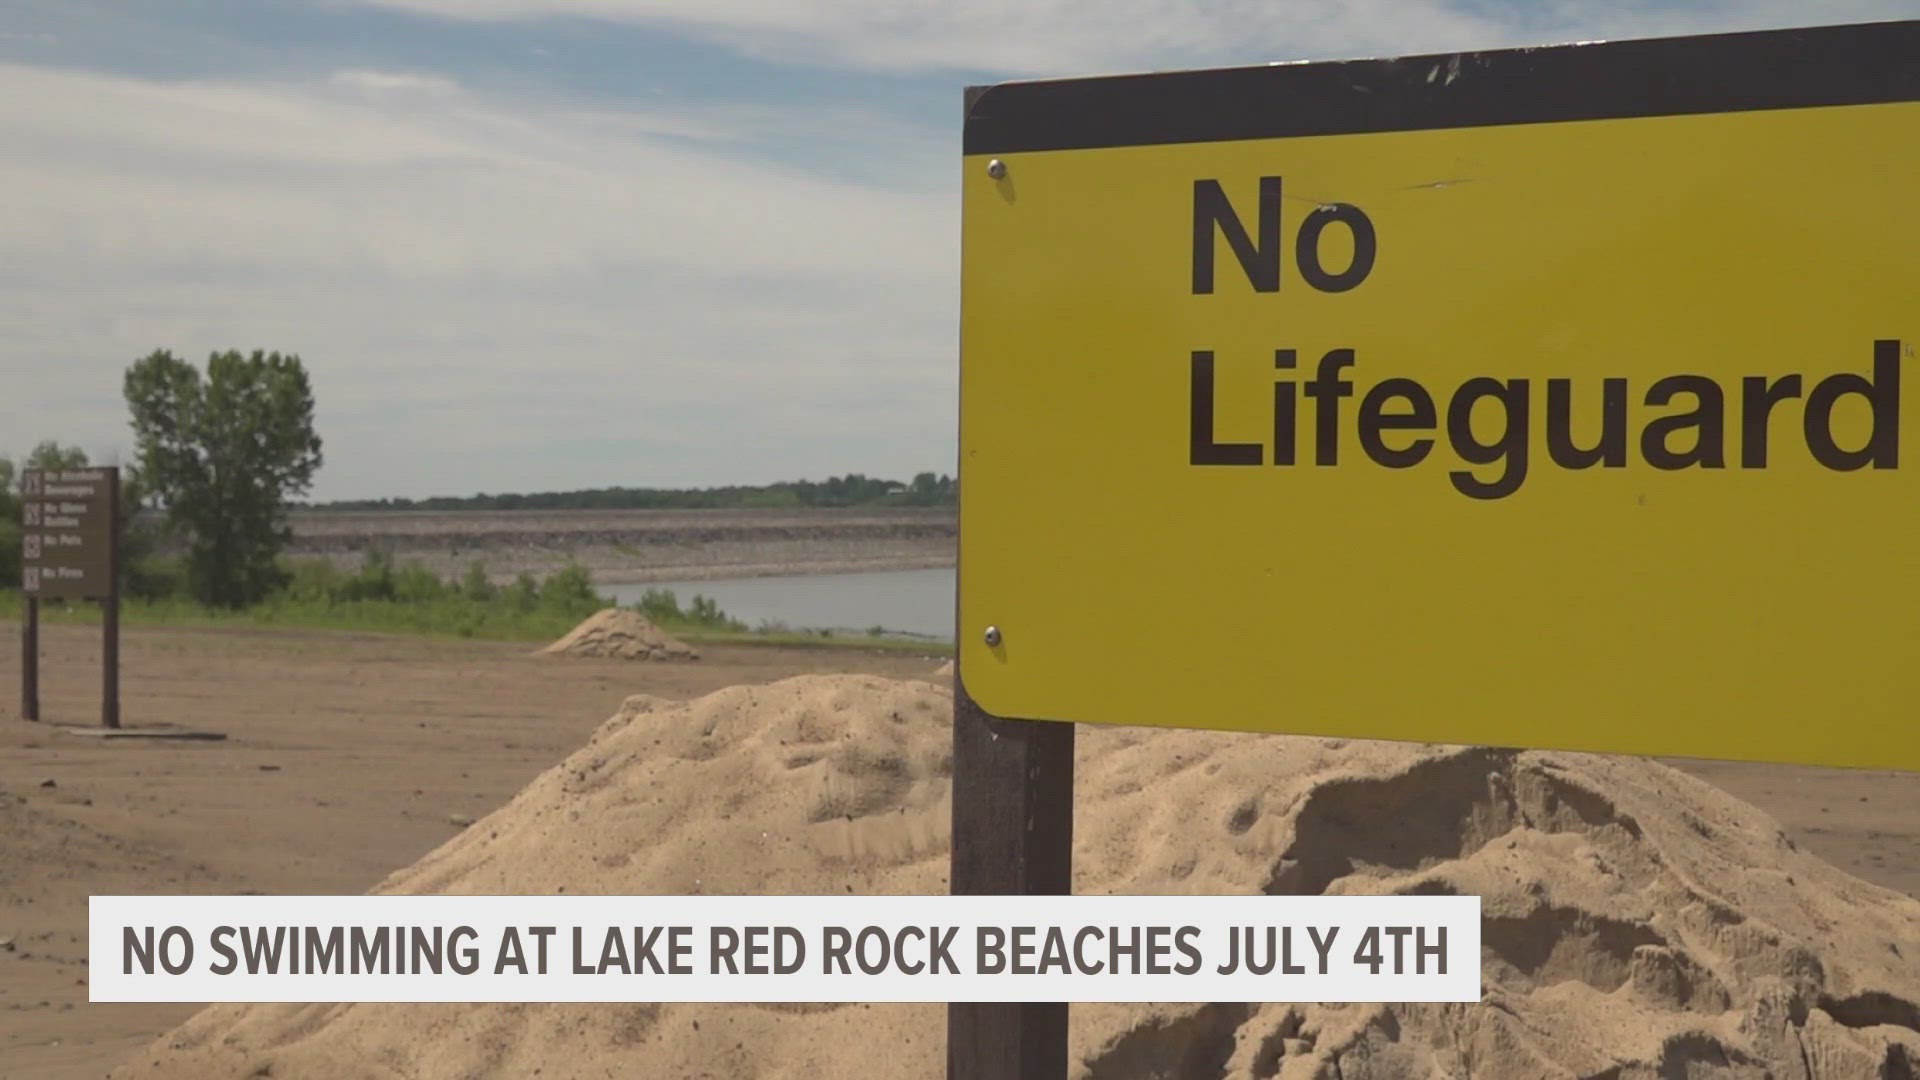 North Overlook Beach in Pella and Whitebreast Beach in Knoxville are both closed until swim lines can be reestablished